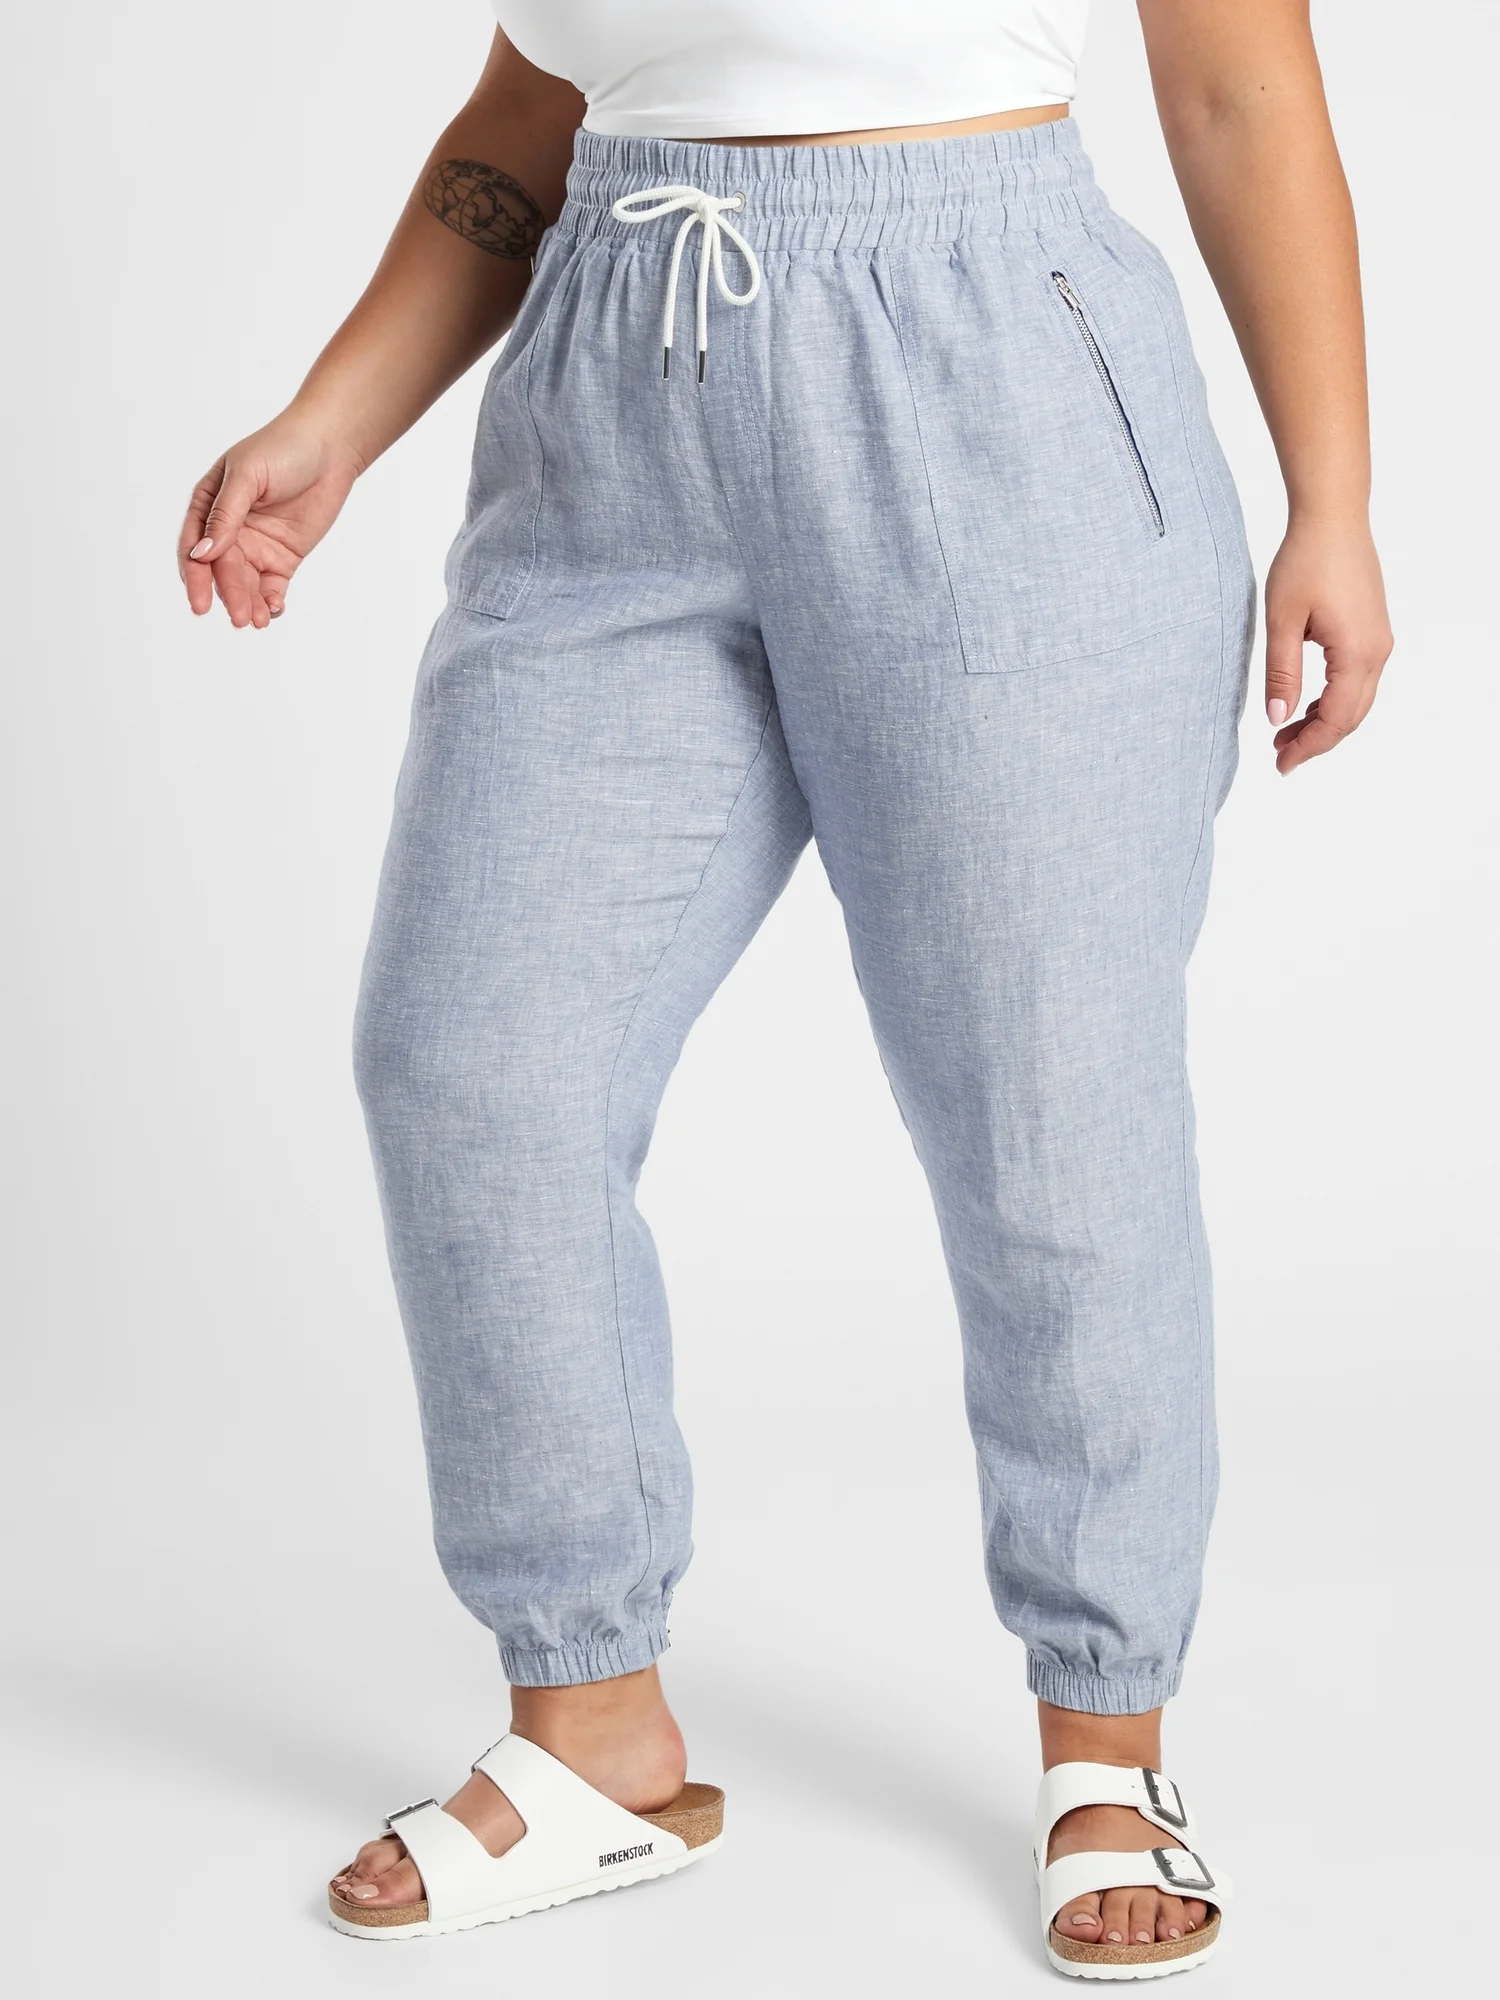 Athleta Cabo Linen Wide Leg Pant Blue Chambray Pull On Drawstring Size 4 -  $36 - From Stephanie